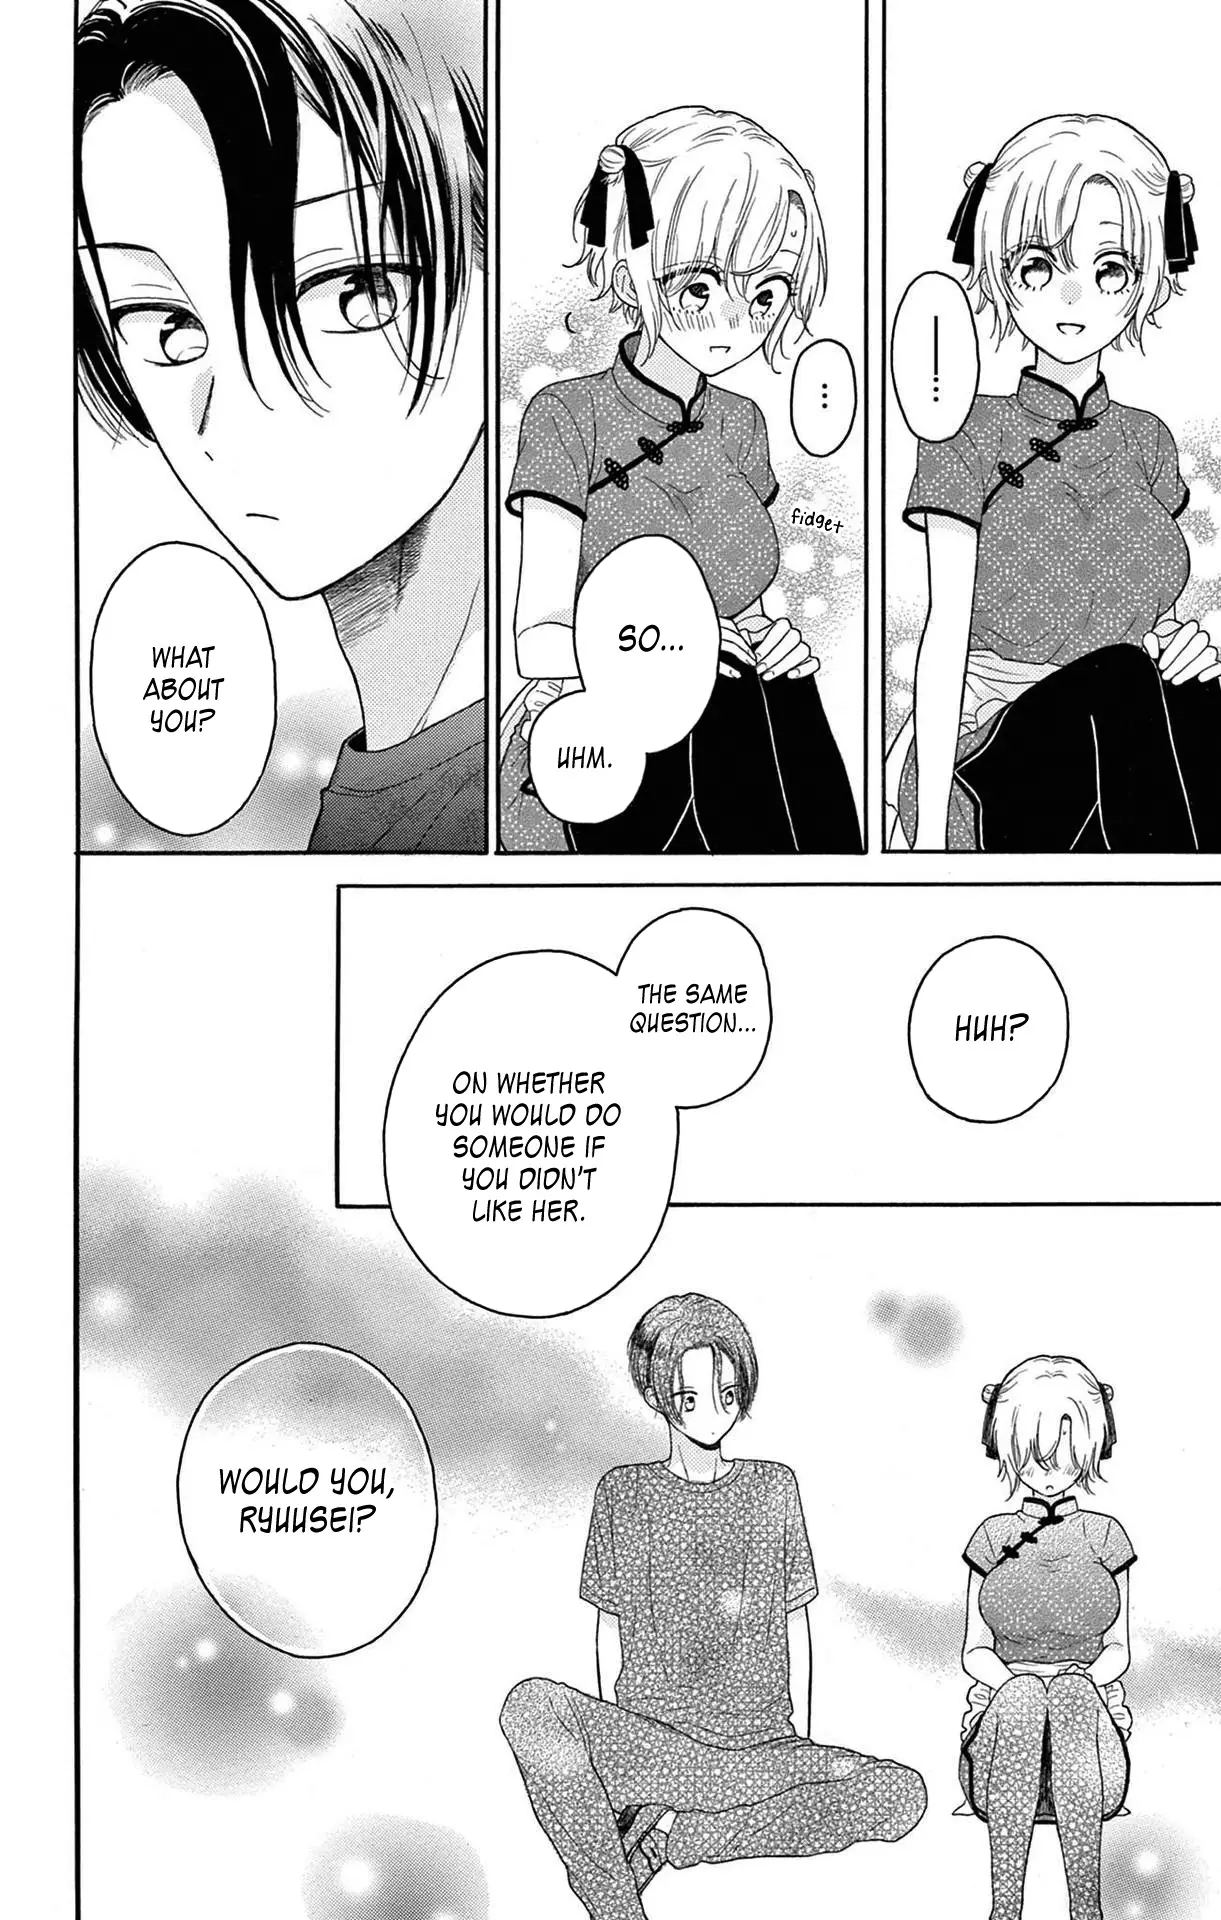 Mikazuki Mao Can't Choose A Gender - 9 page 19-02d510e1